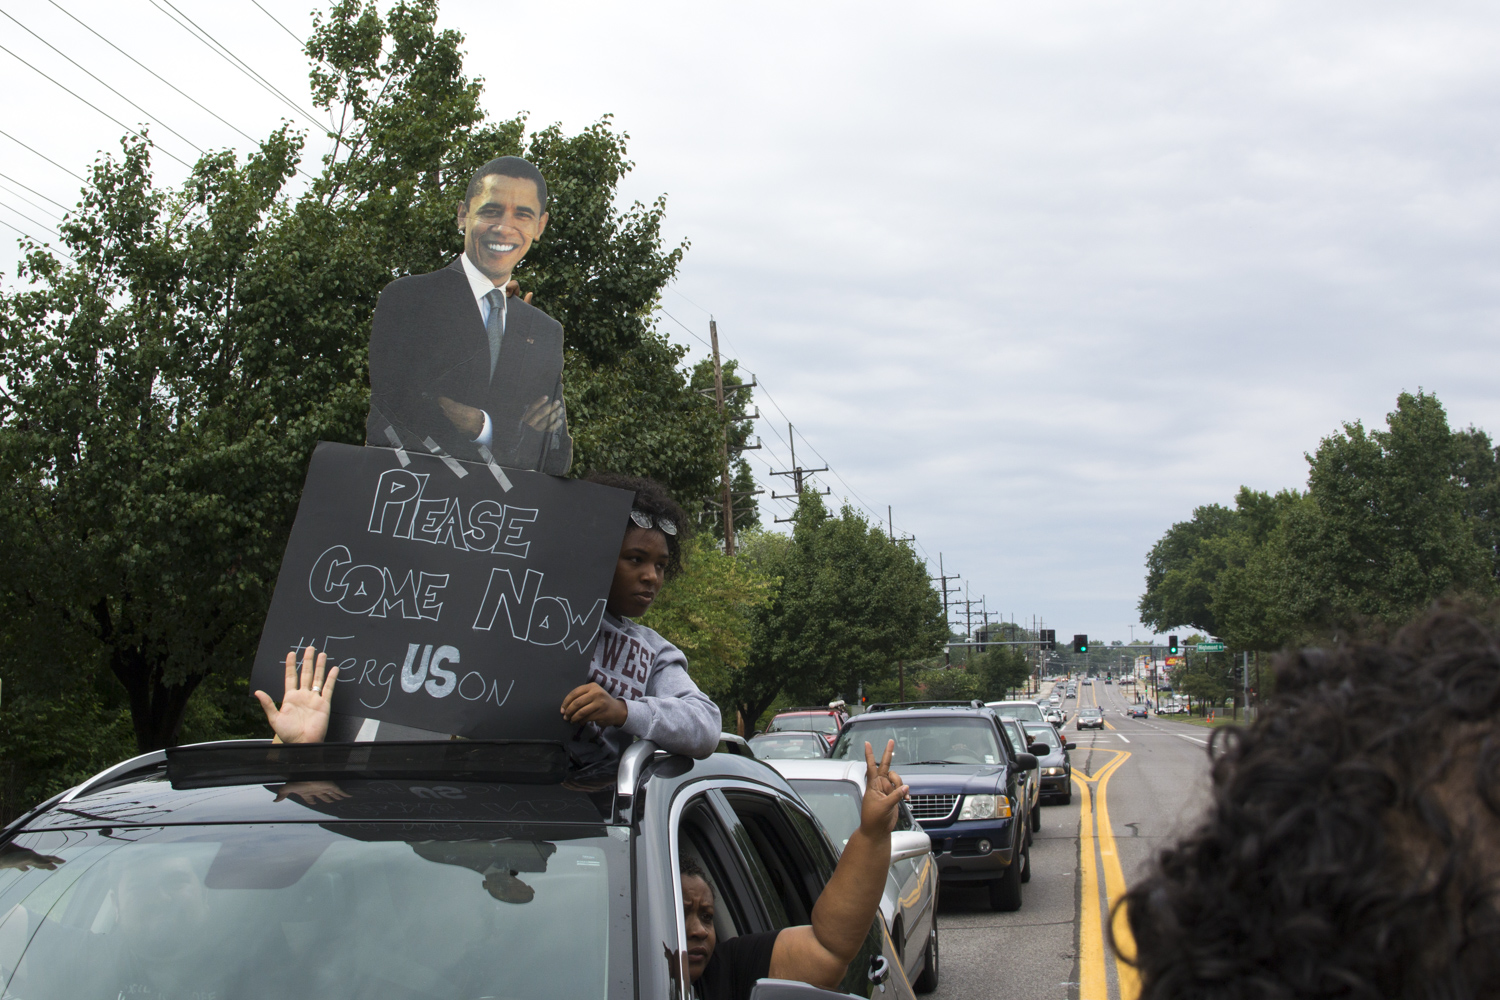 Thousands of people participated in a peaceful demonstration in Ferguson, Missouri.